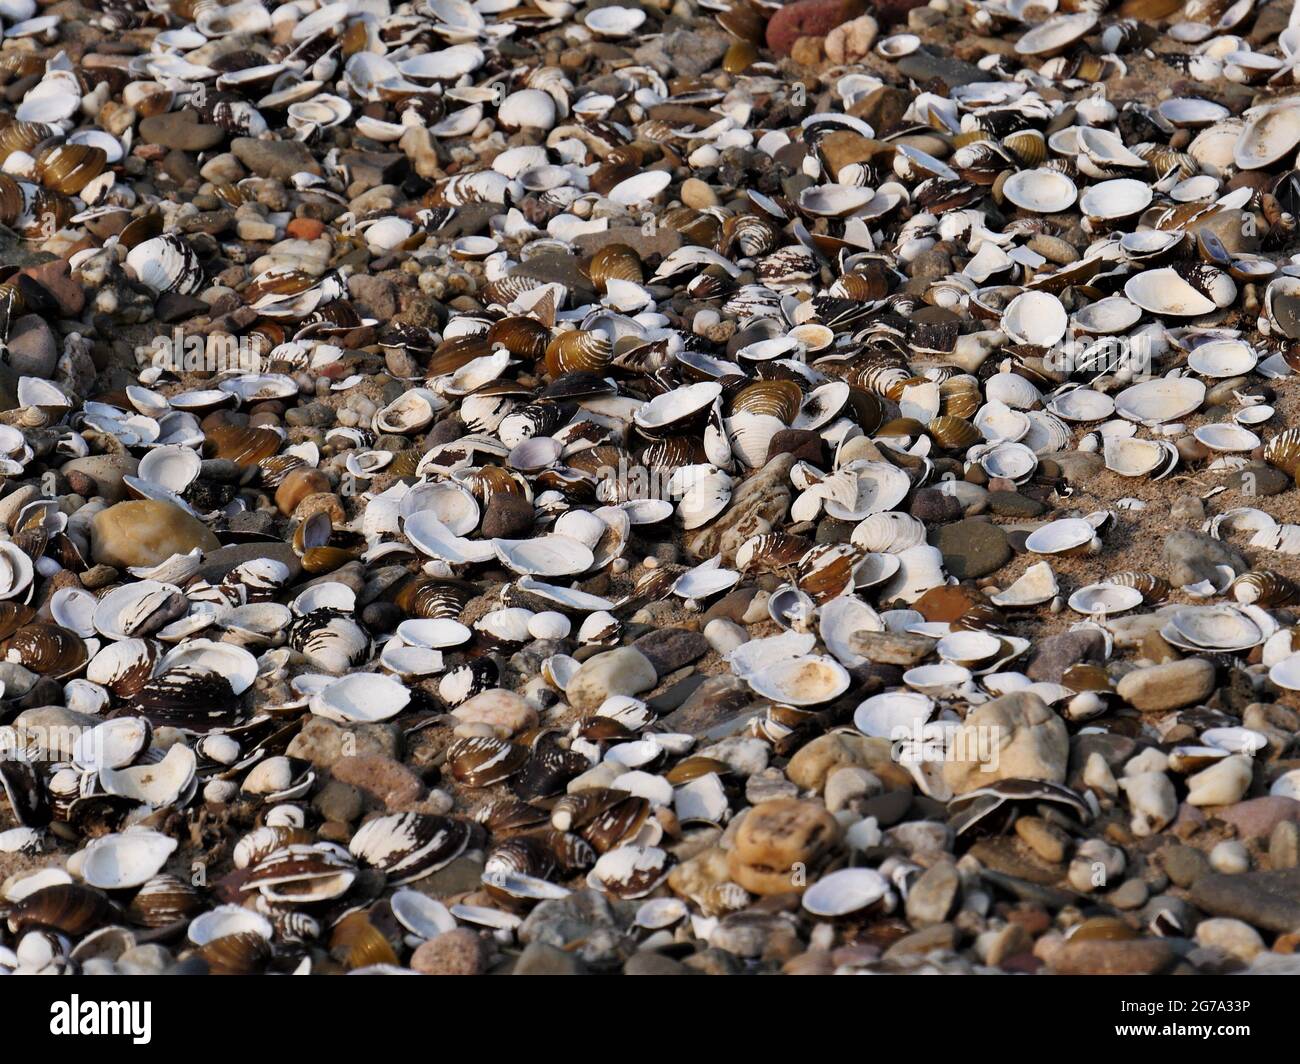 Shells of river mussels, small pebbles and sand on the beach of a river Stock Photo